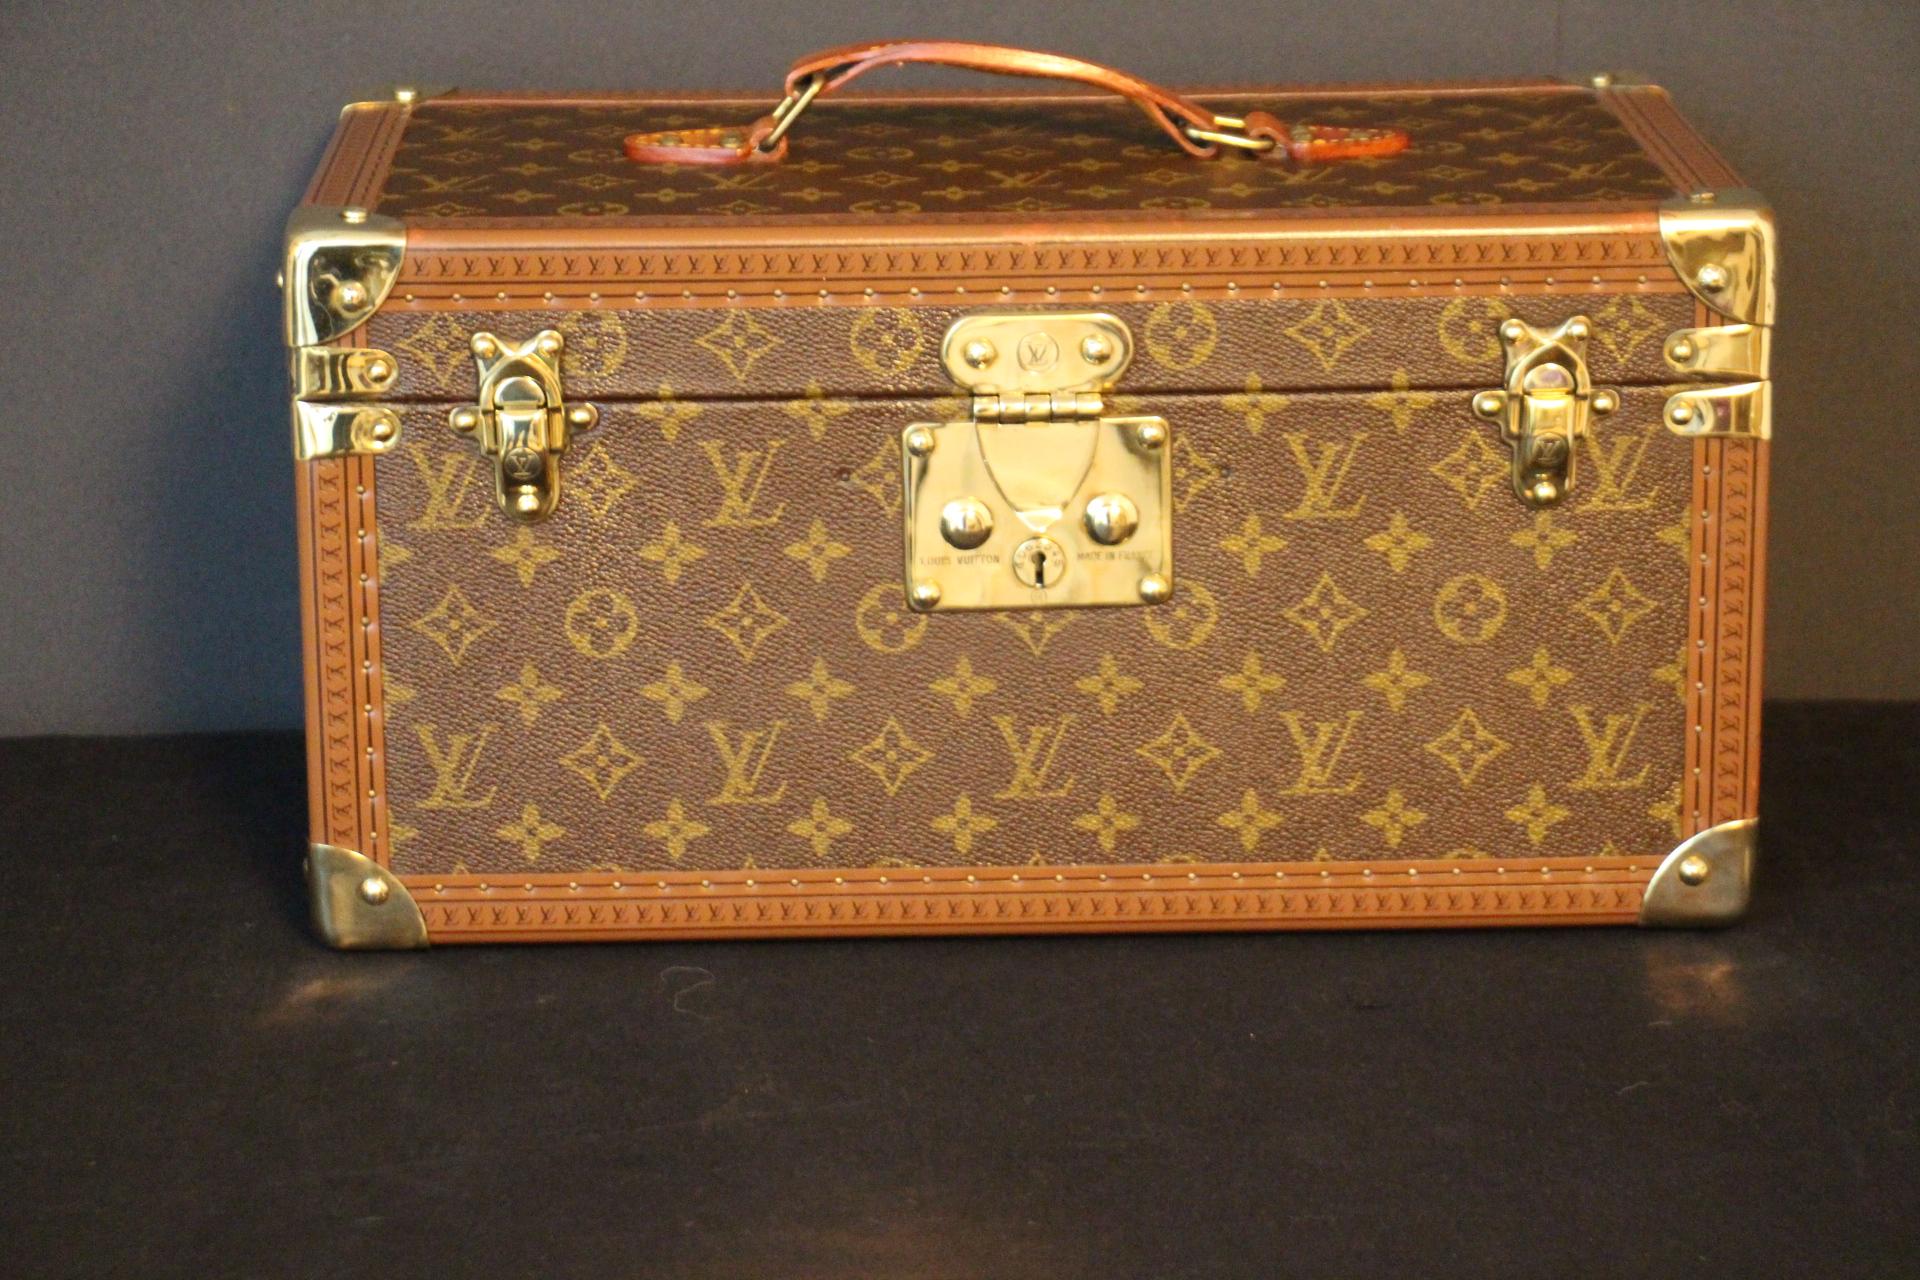 This Louis Vuitton beauty case features monogram canvas and all brass fittings.
All studs are marked Louis Vuitton as well as its top leather handle. All its trim is printed with Louis Vuitton monogram.
Its interior is in beige coated canvas and it